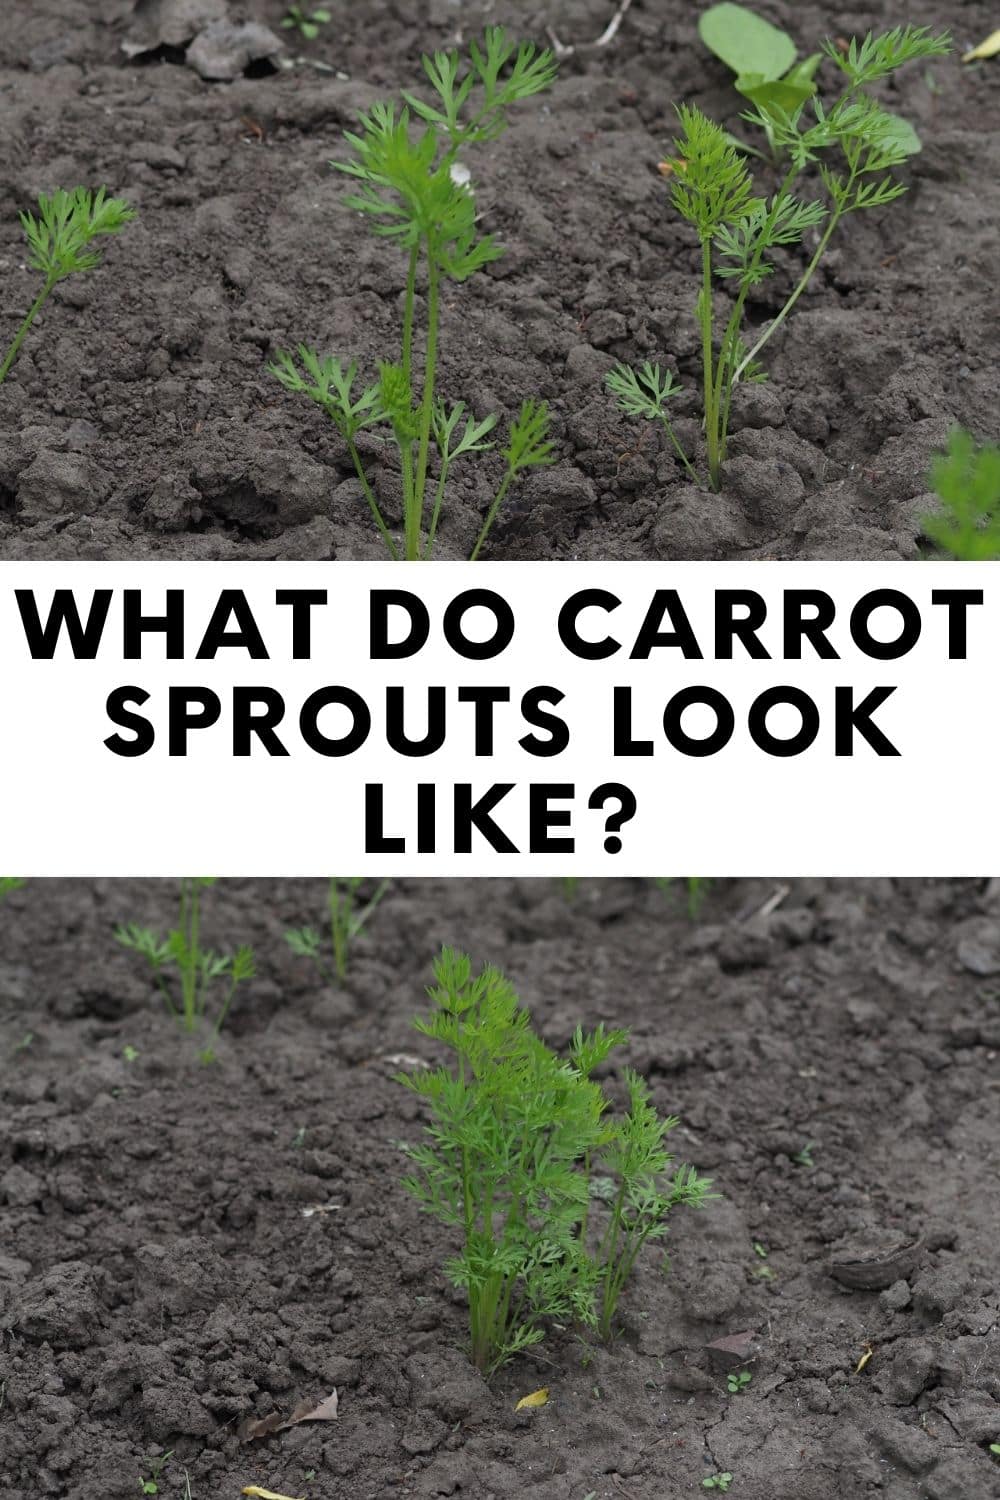 Have you ever wondered what carrot sprouts look like?